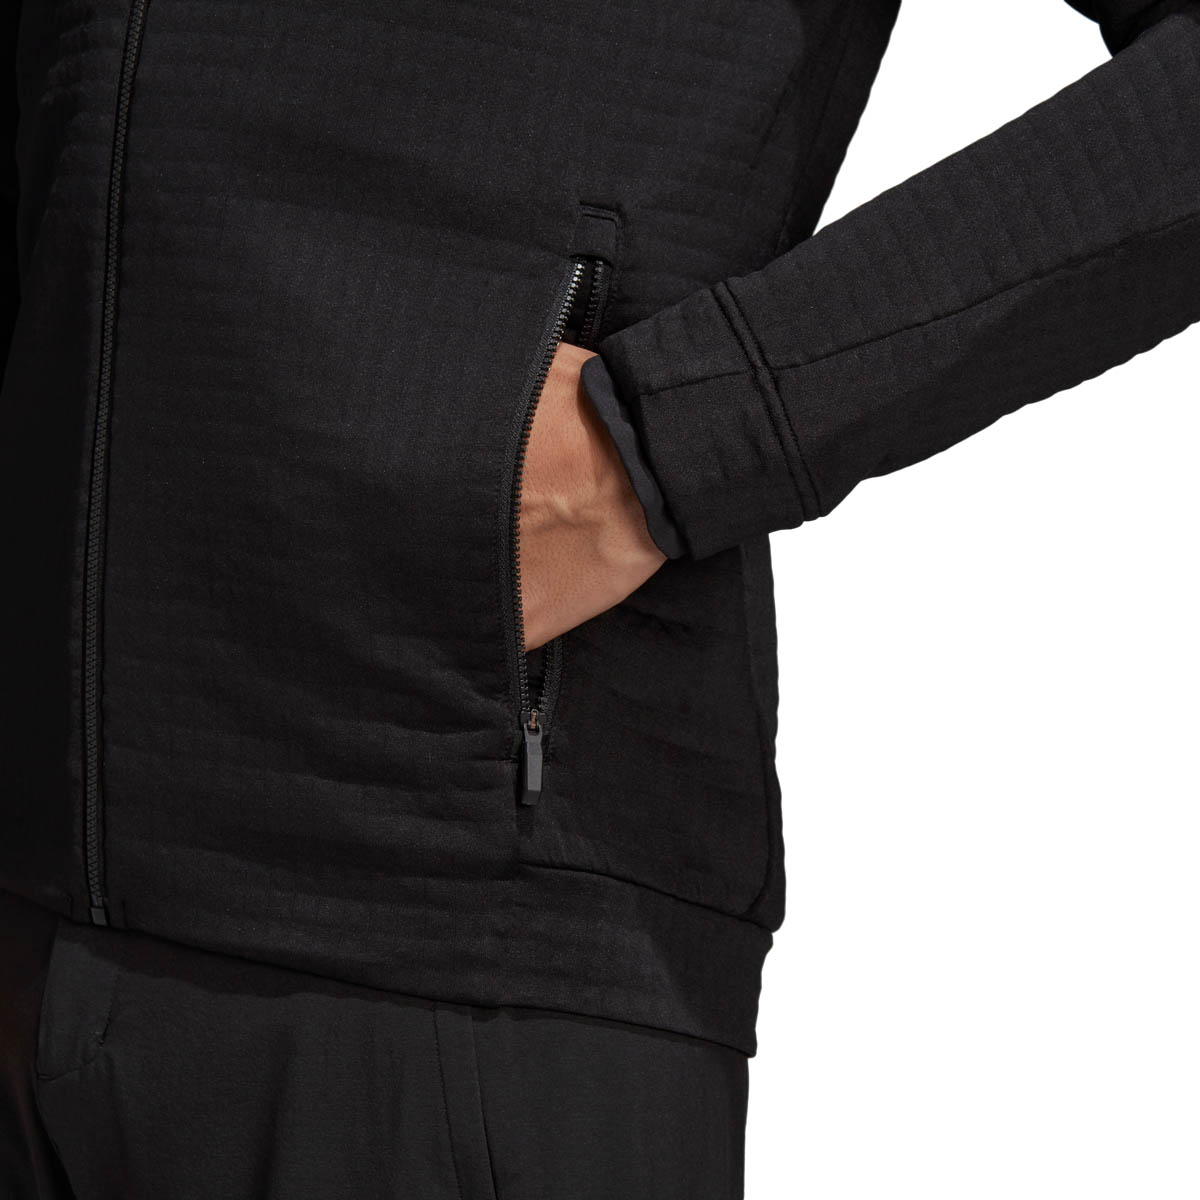 grough — Polartec Power Air: keeps you warm and sheds five times fewer ...